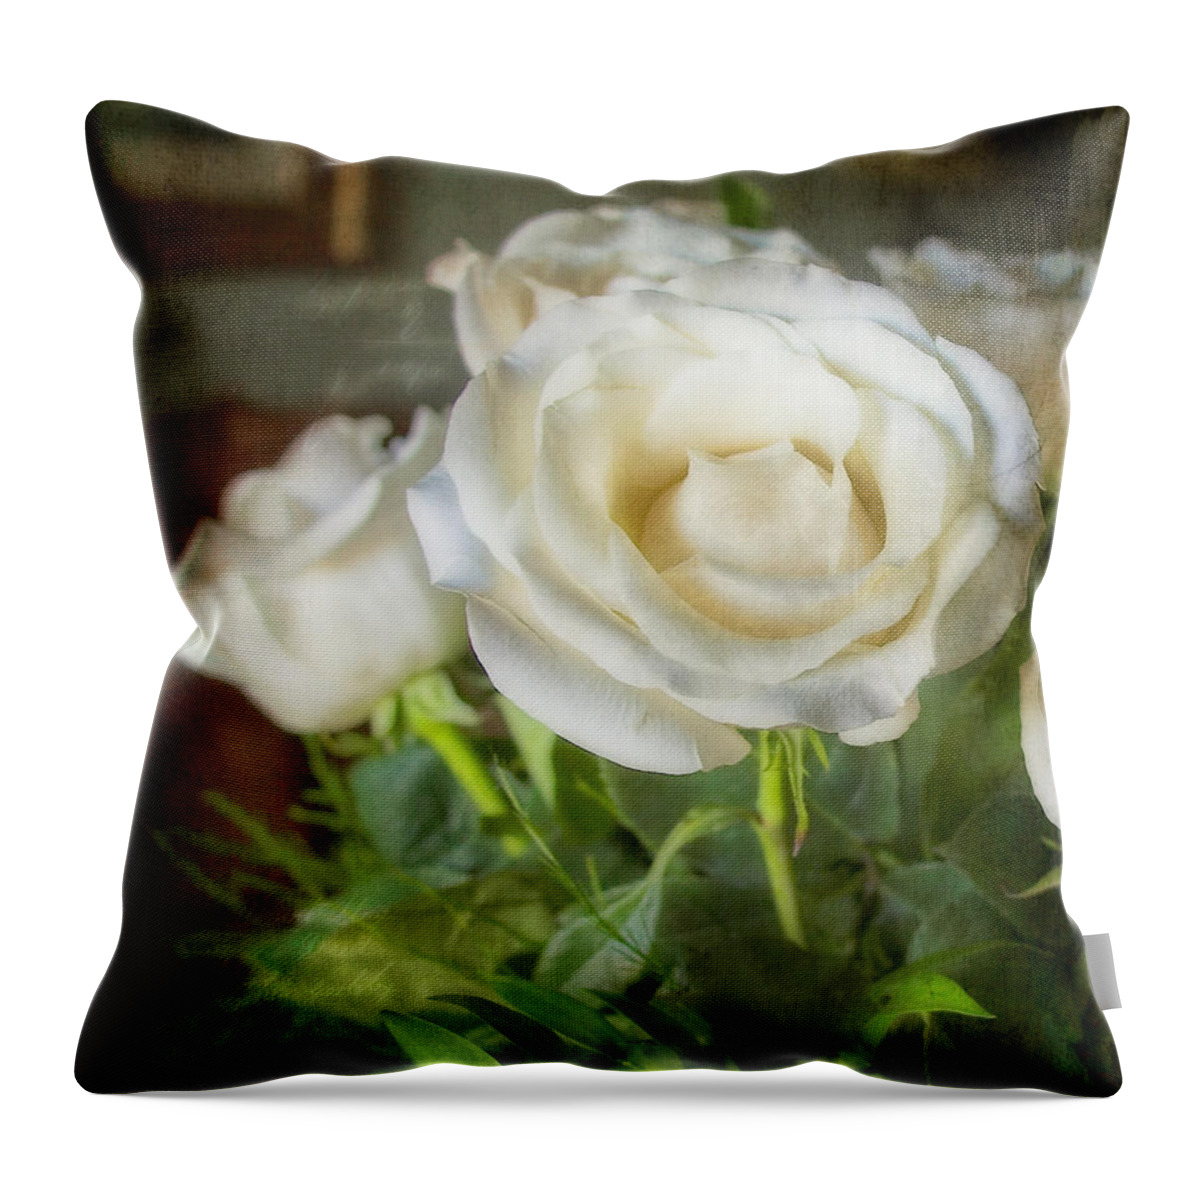 Flowers Throw Pillow featuring the photograph To My Love by Joan Bertucci